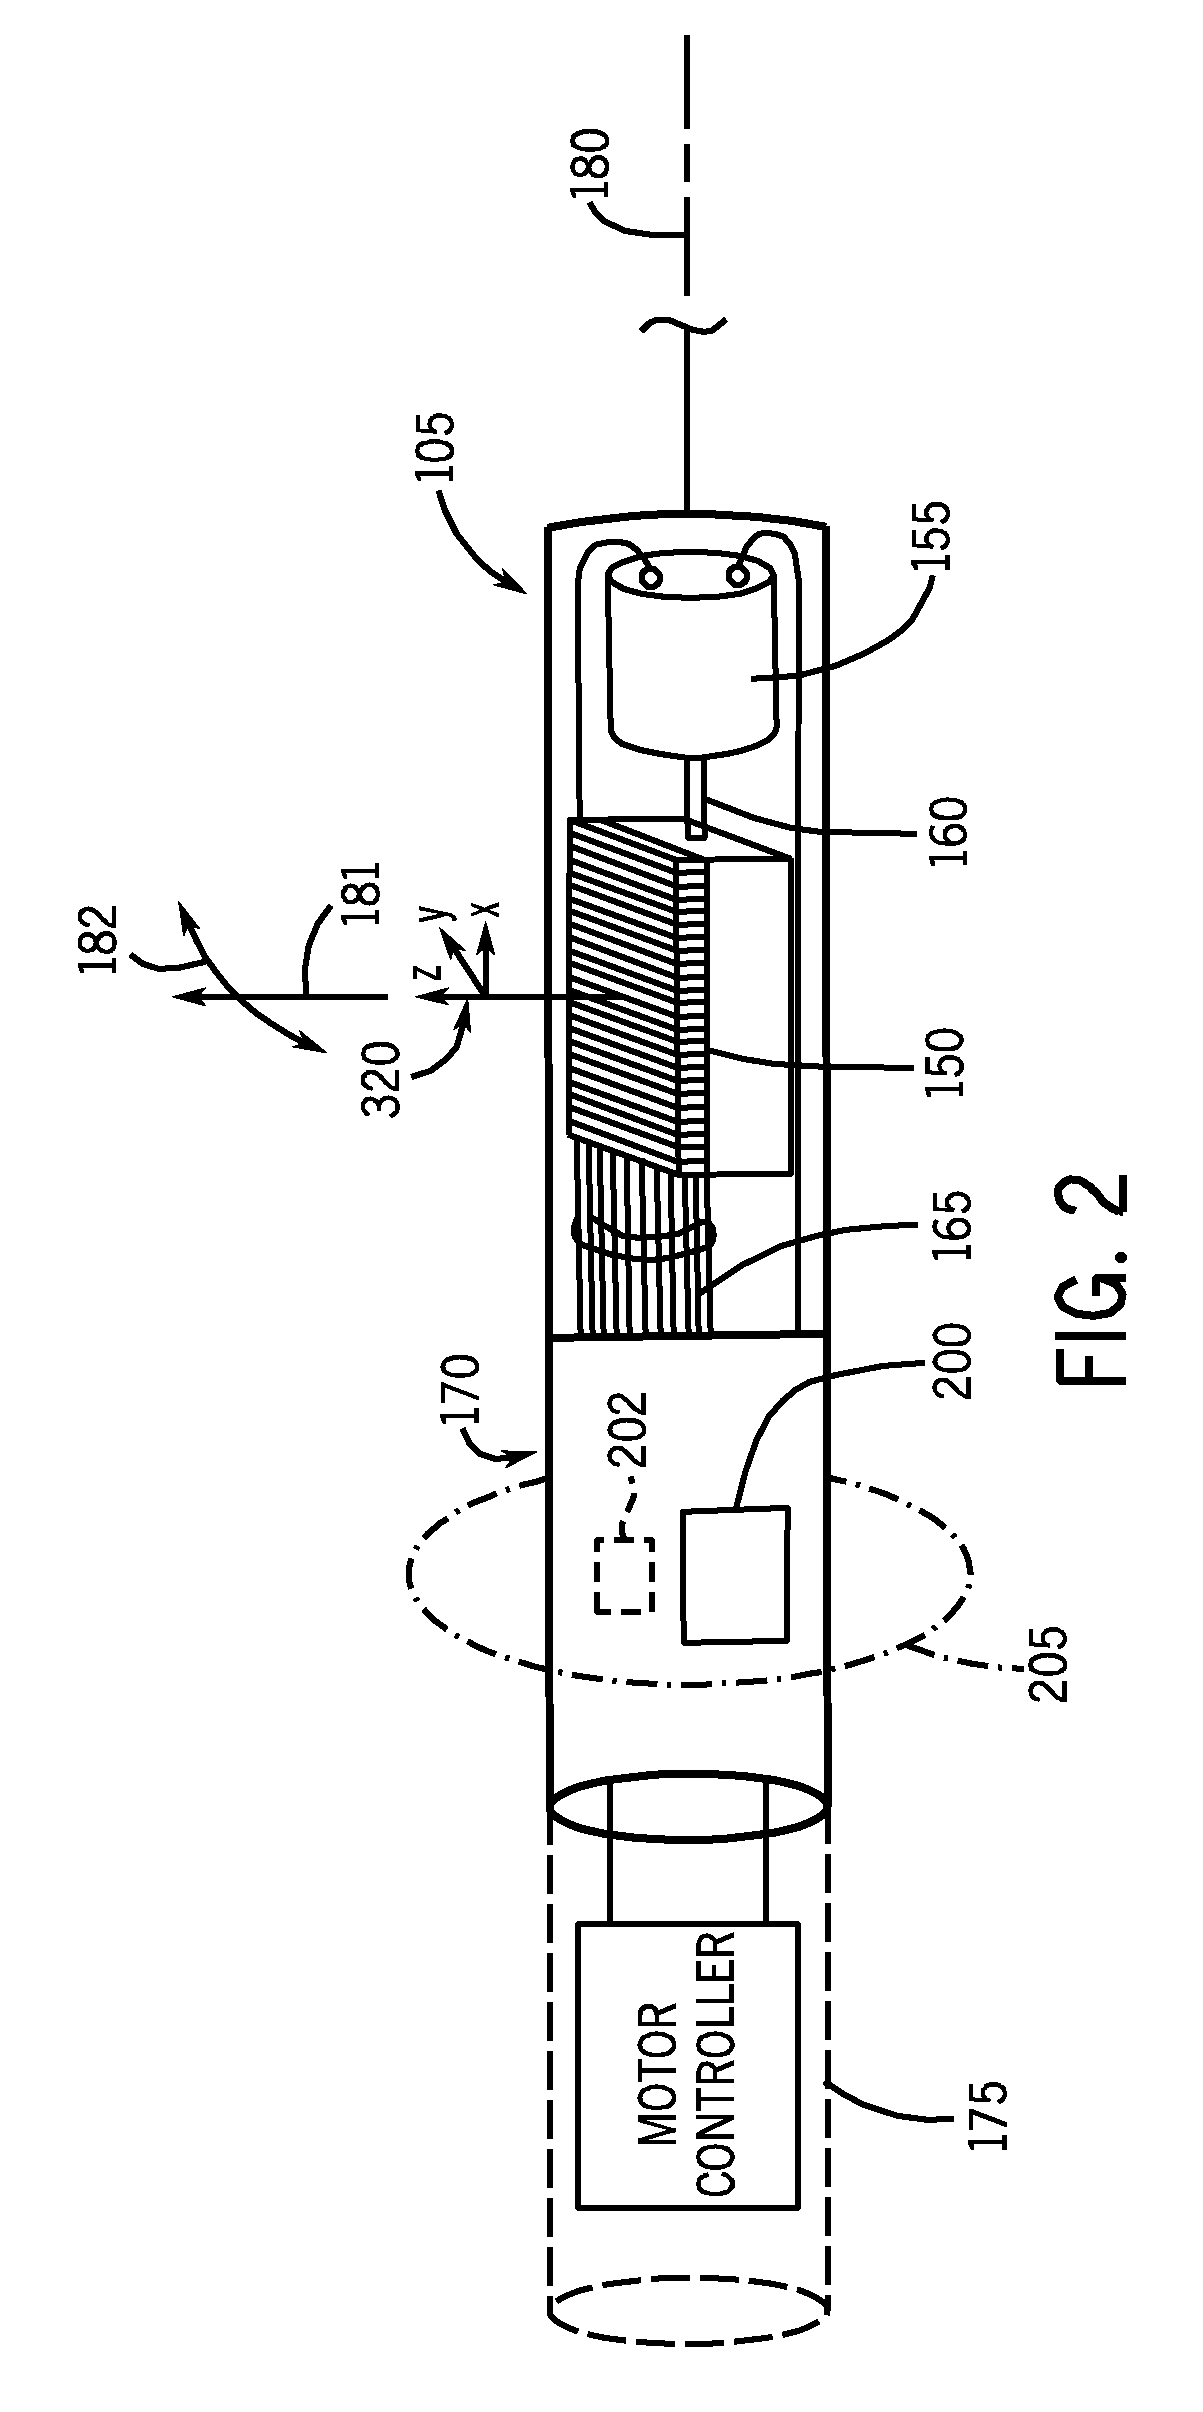 System and method of combining ultrasound image acquisition with fluoroscopic image acquisition